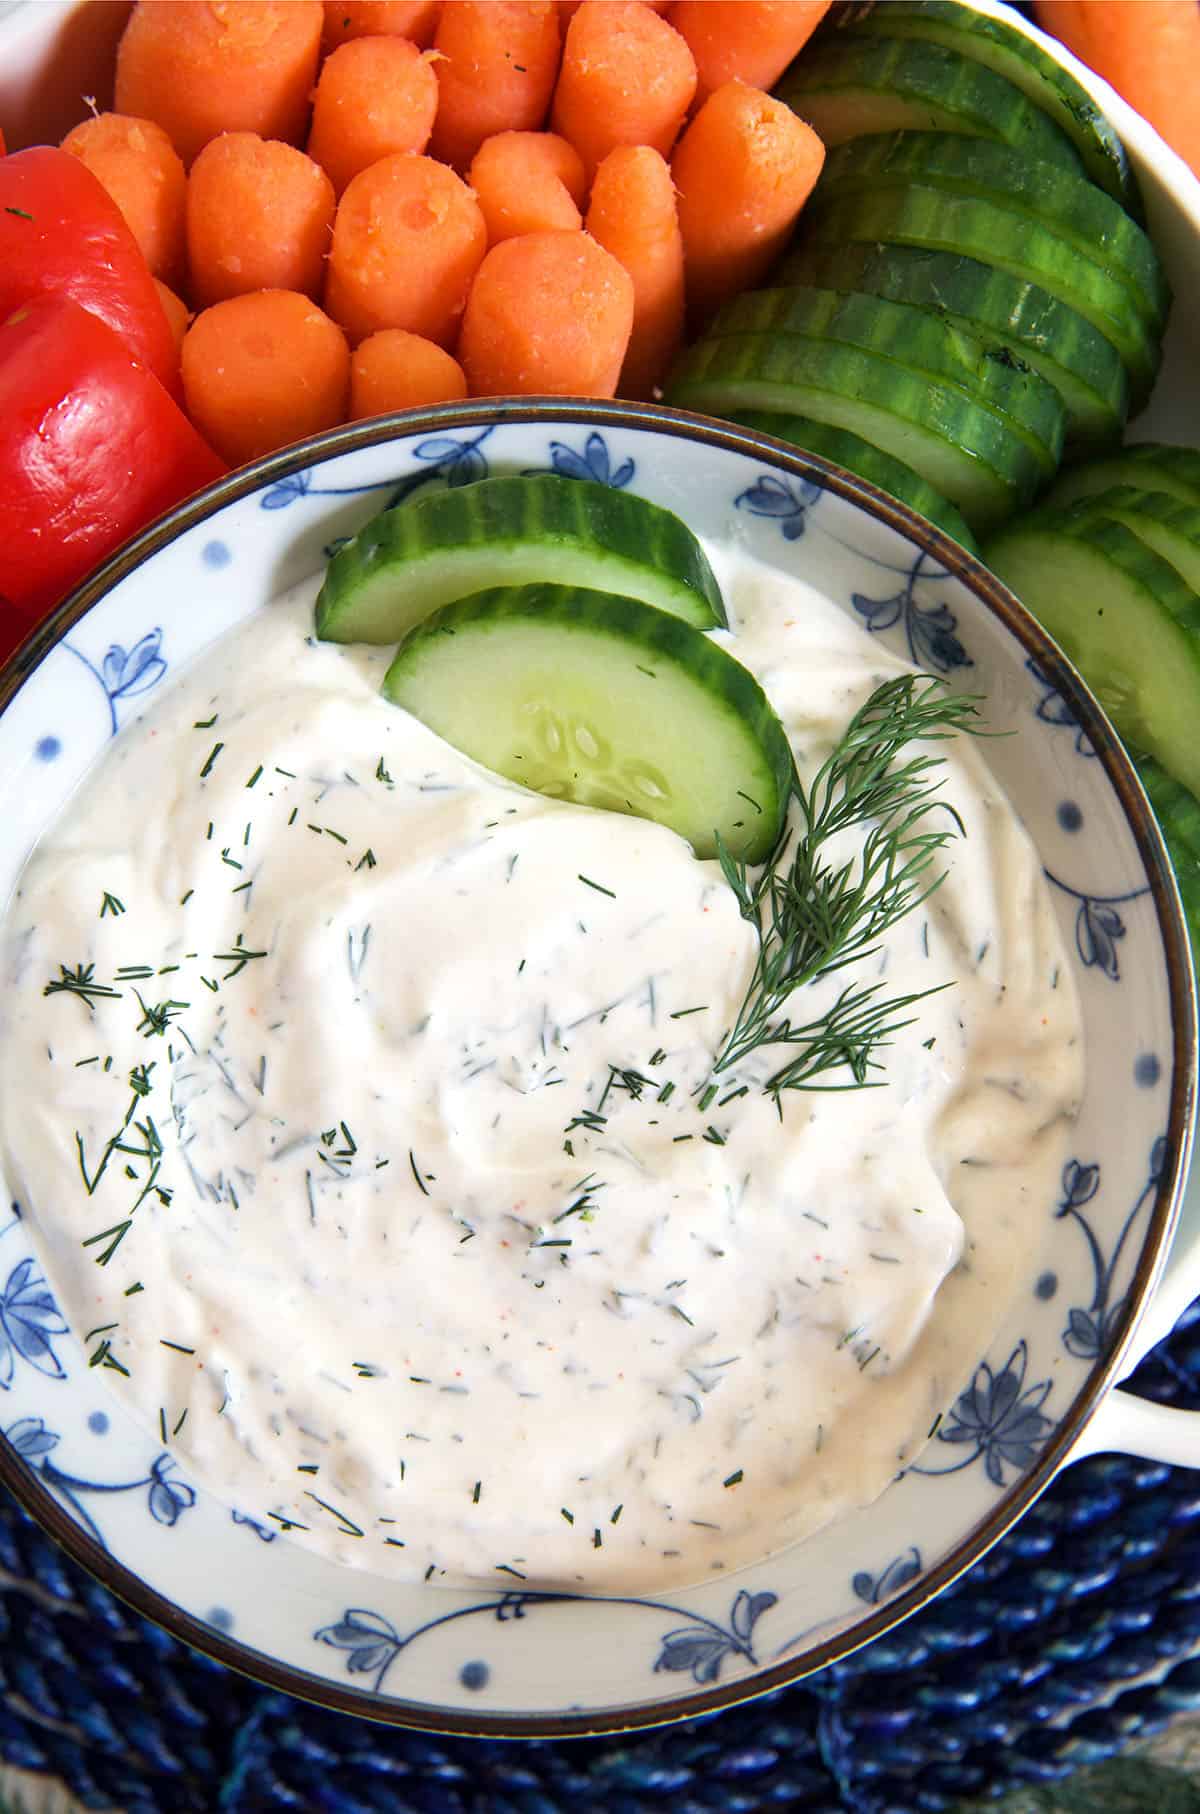 Cucumber slices are placed in a bowl of dill dip.